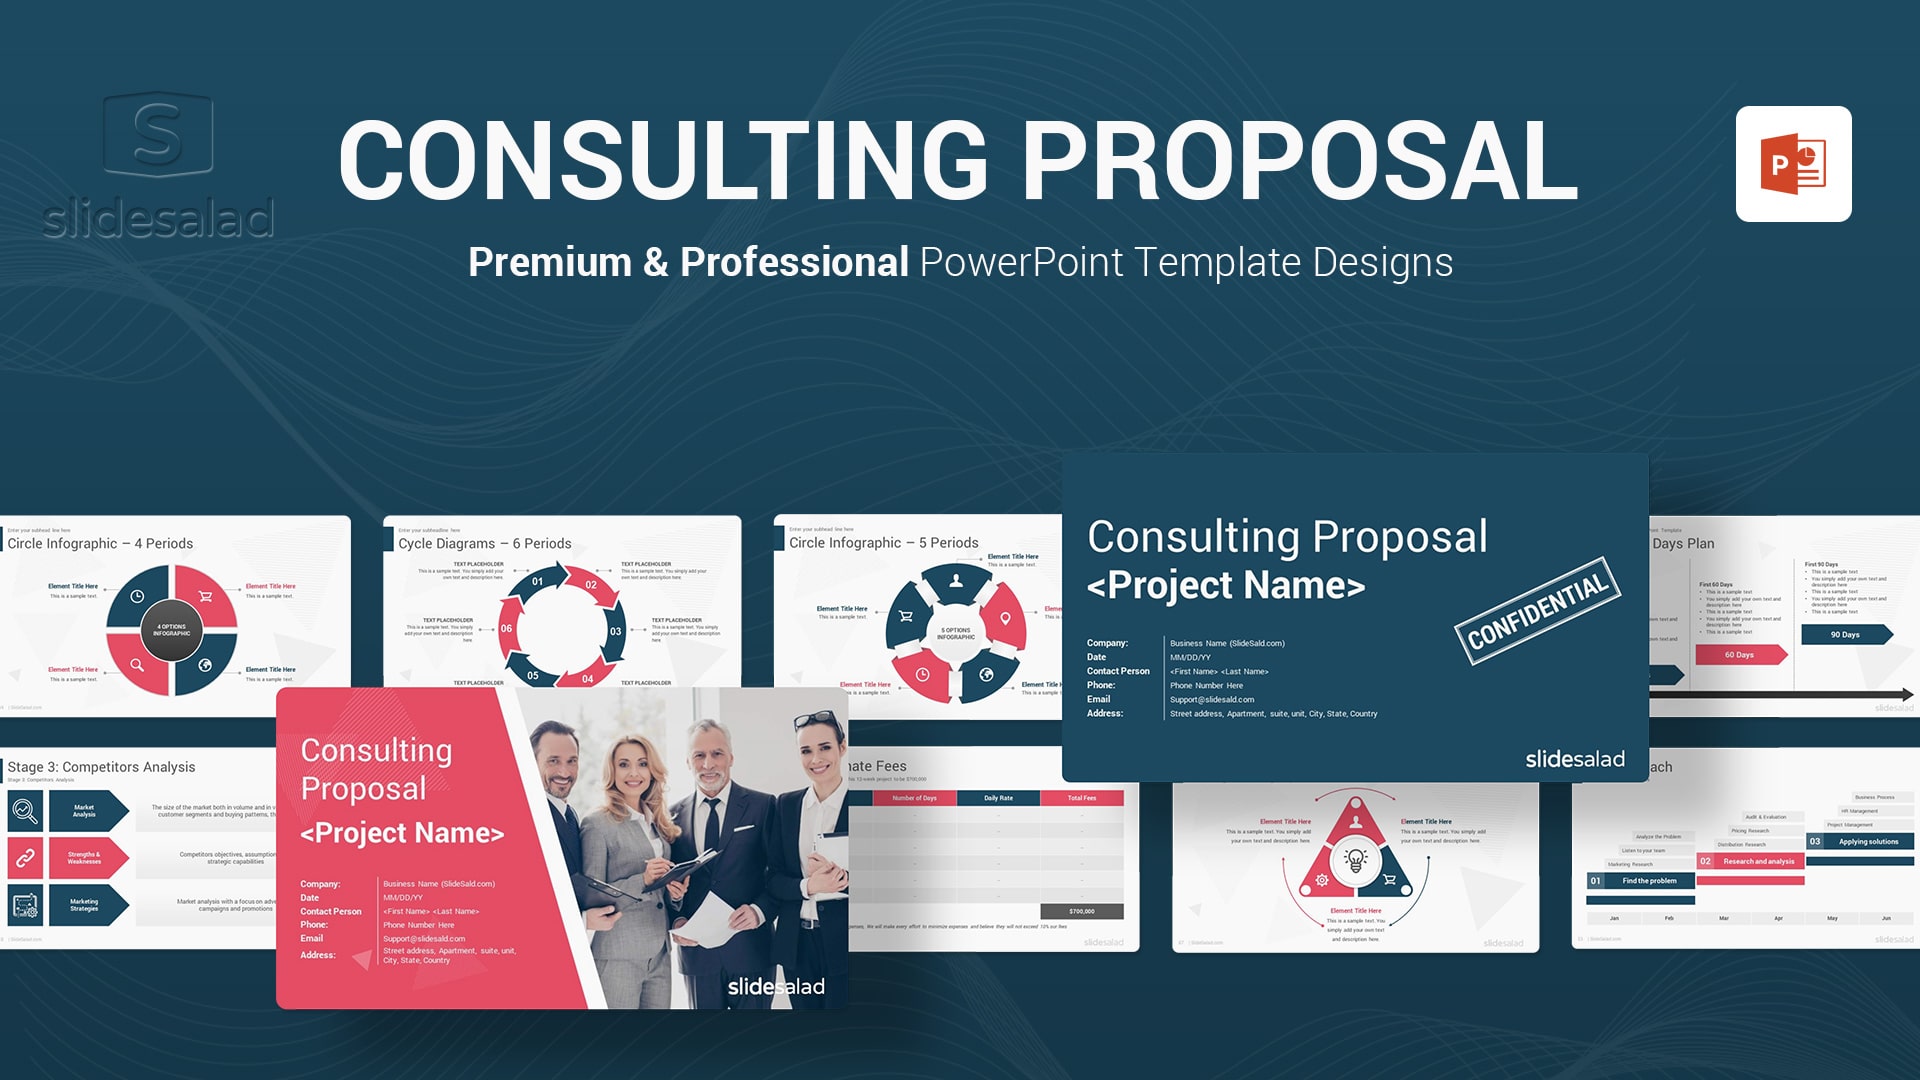 Best Consulting Proposal PowerPoint Template - Professional and Effective Consulting Proposal Layouts